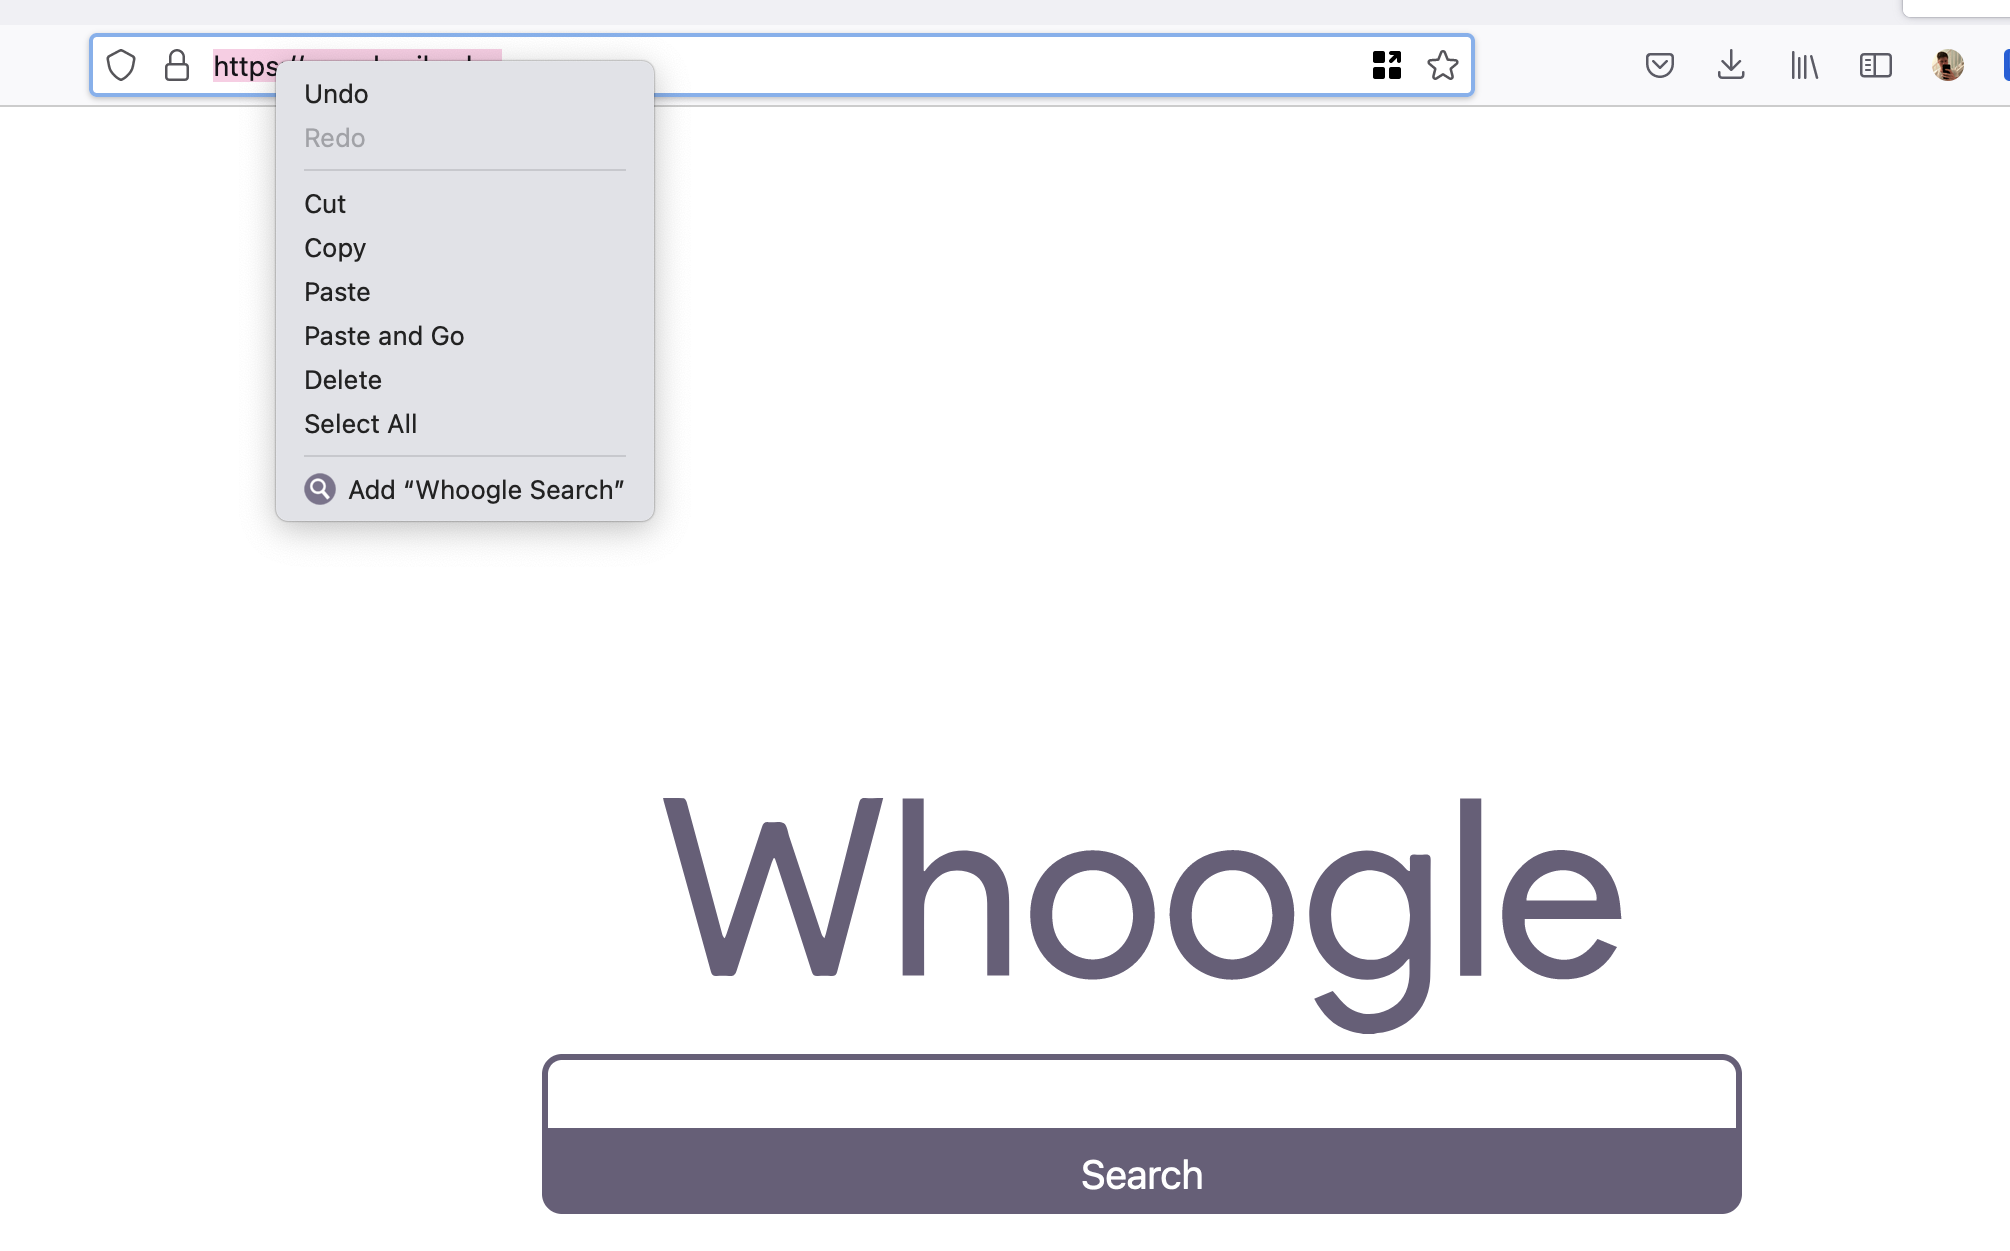 Adding Whoogle as a search engine